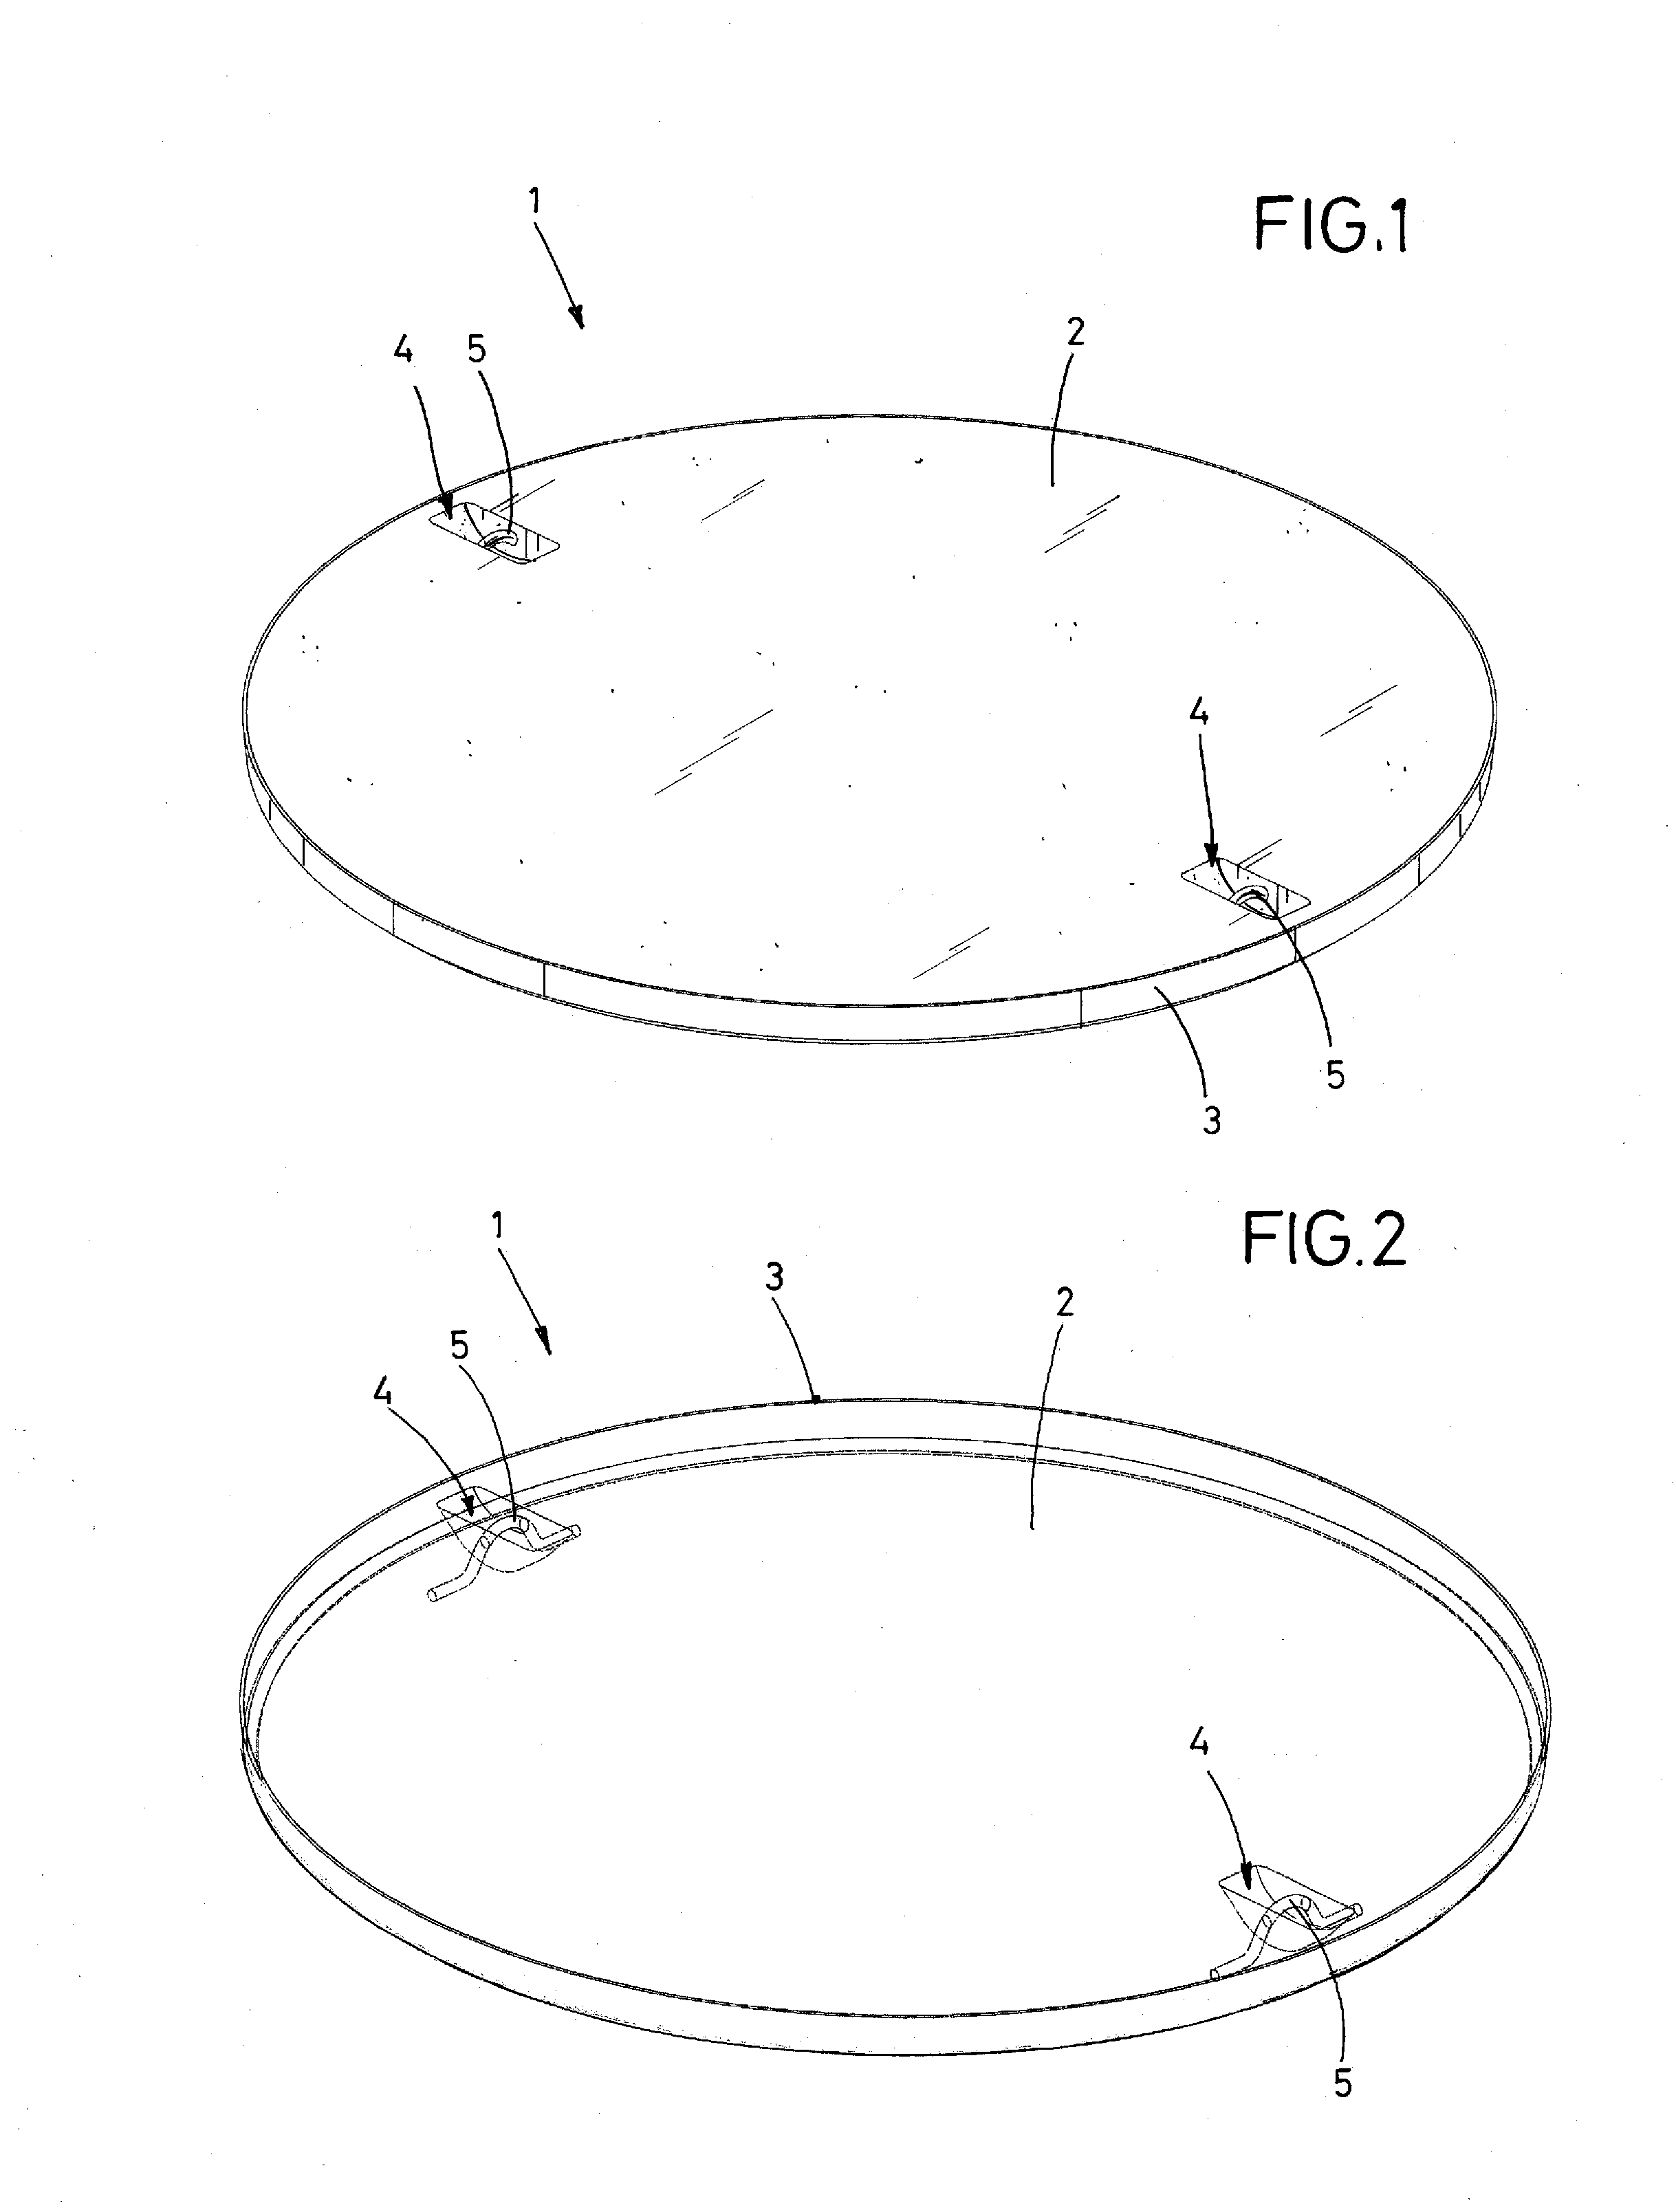 Manhole cover optimized for manufacturing